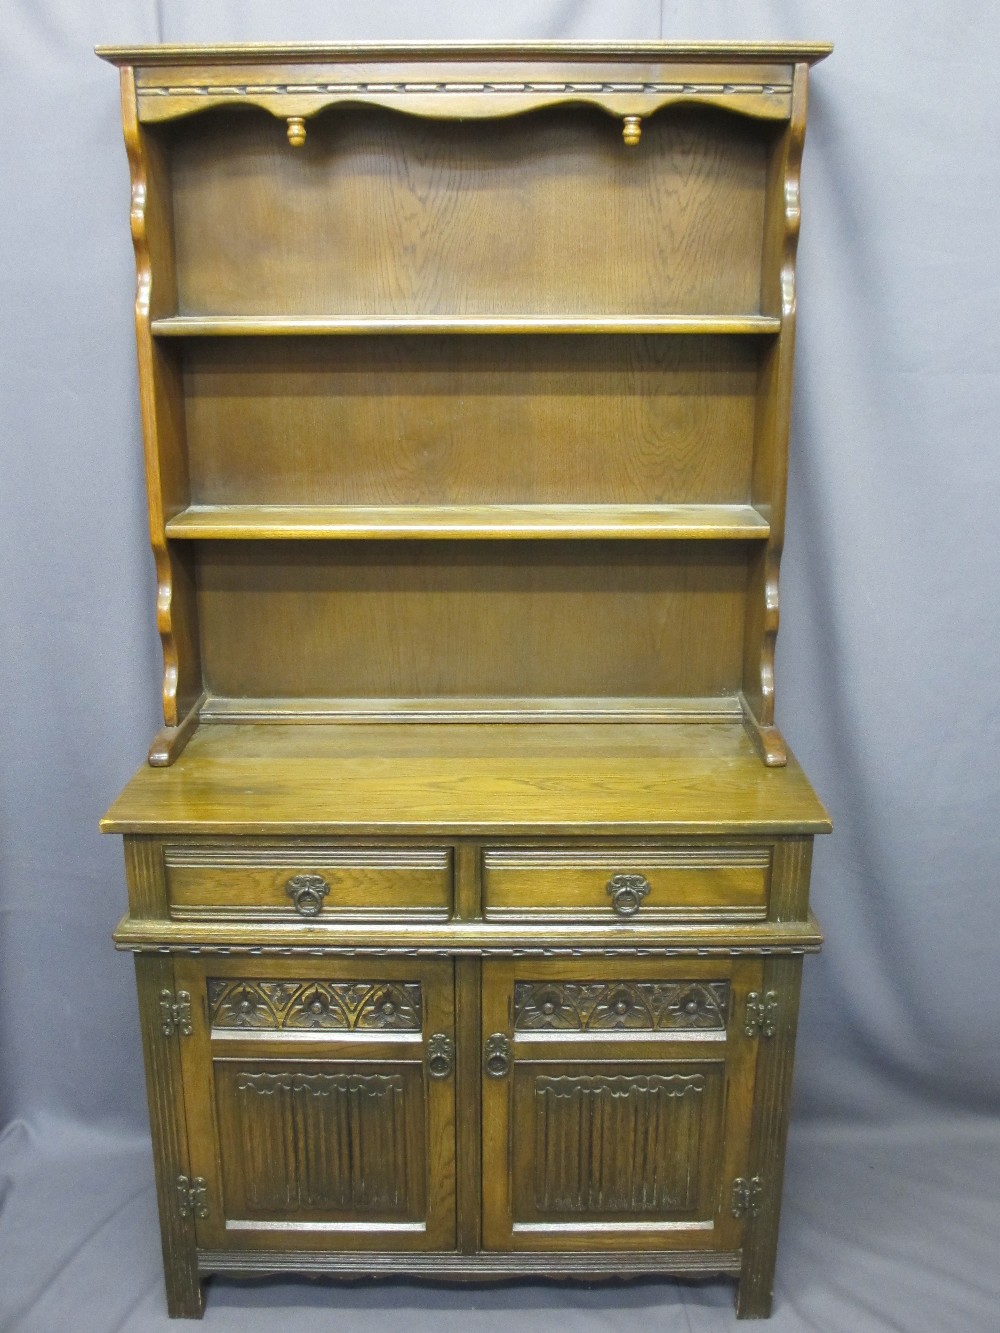 TWO ITEMS OF PRIORY STYLE FURNITURE with linenfold carving including a two door, two drawer dresser, - Image 4 of 5